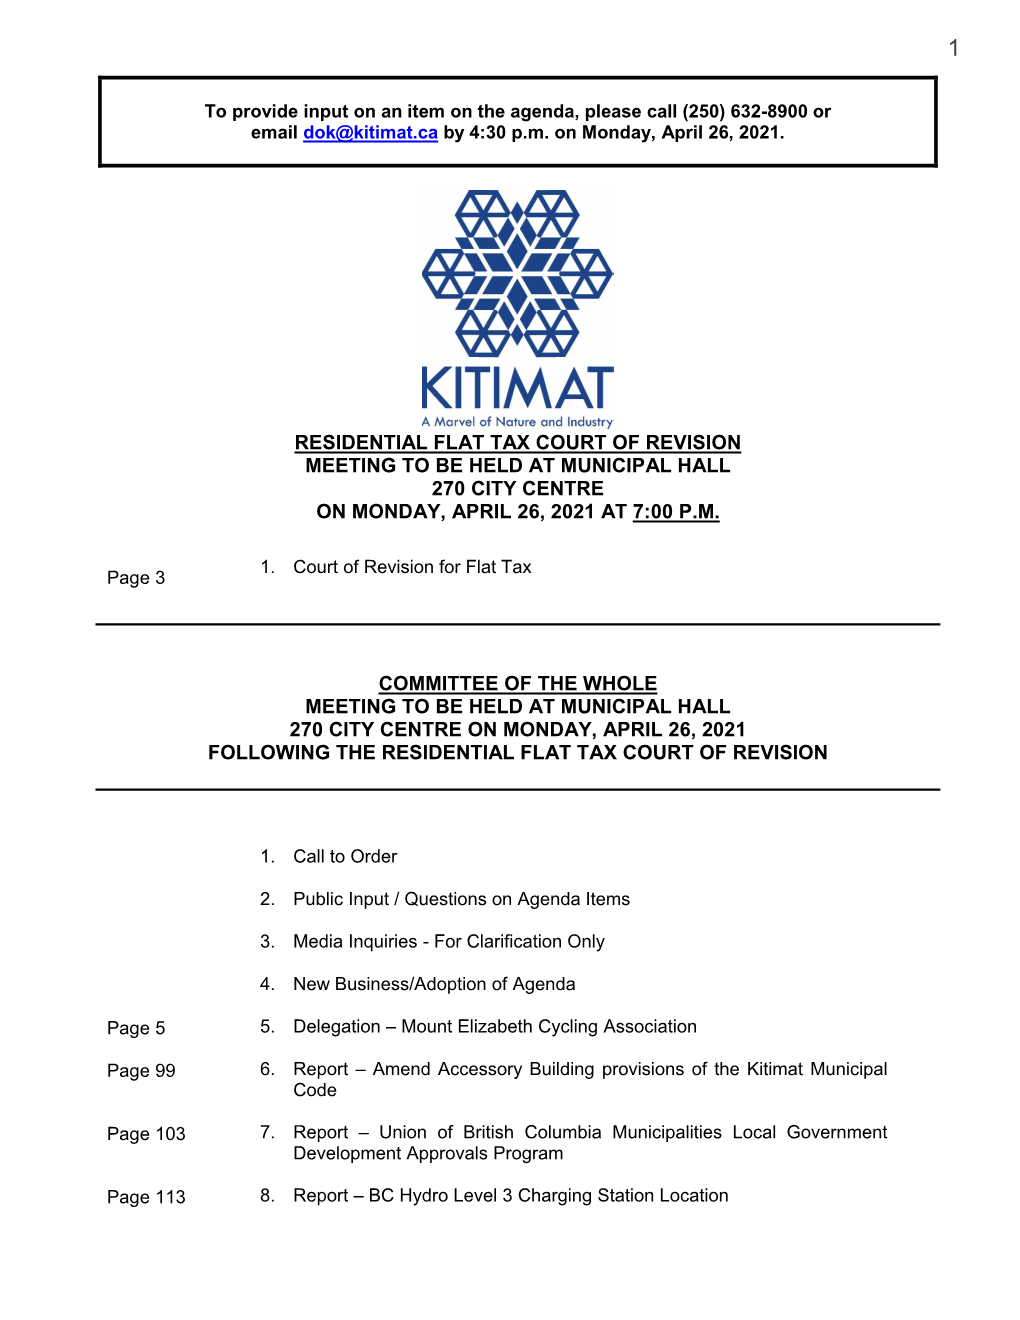 Residential Flat Tax Court of Revision Meeting to Be Held at Municipal Hall 270 City Centre on Monday, April 26, 2021 at 7:00 P.M